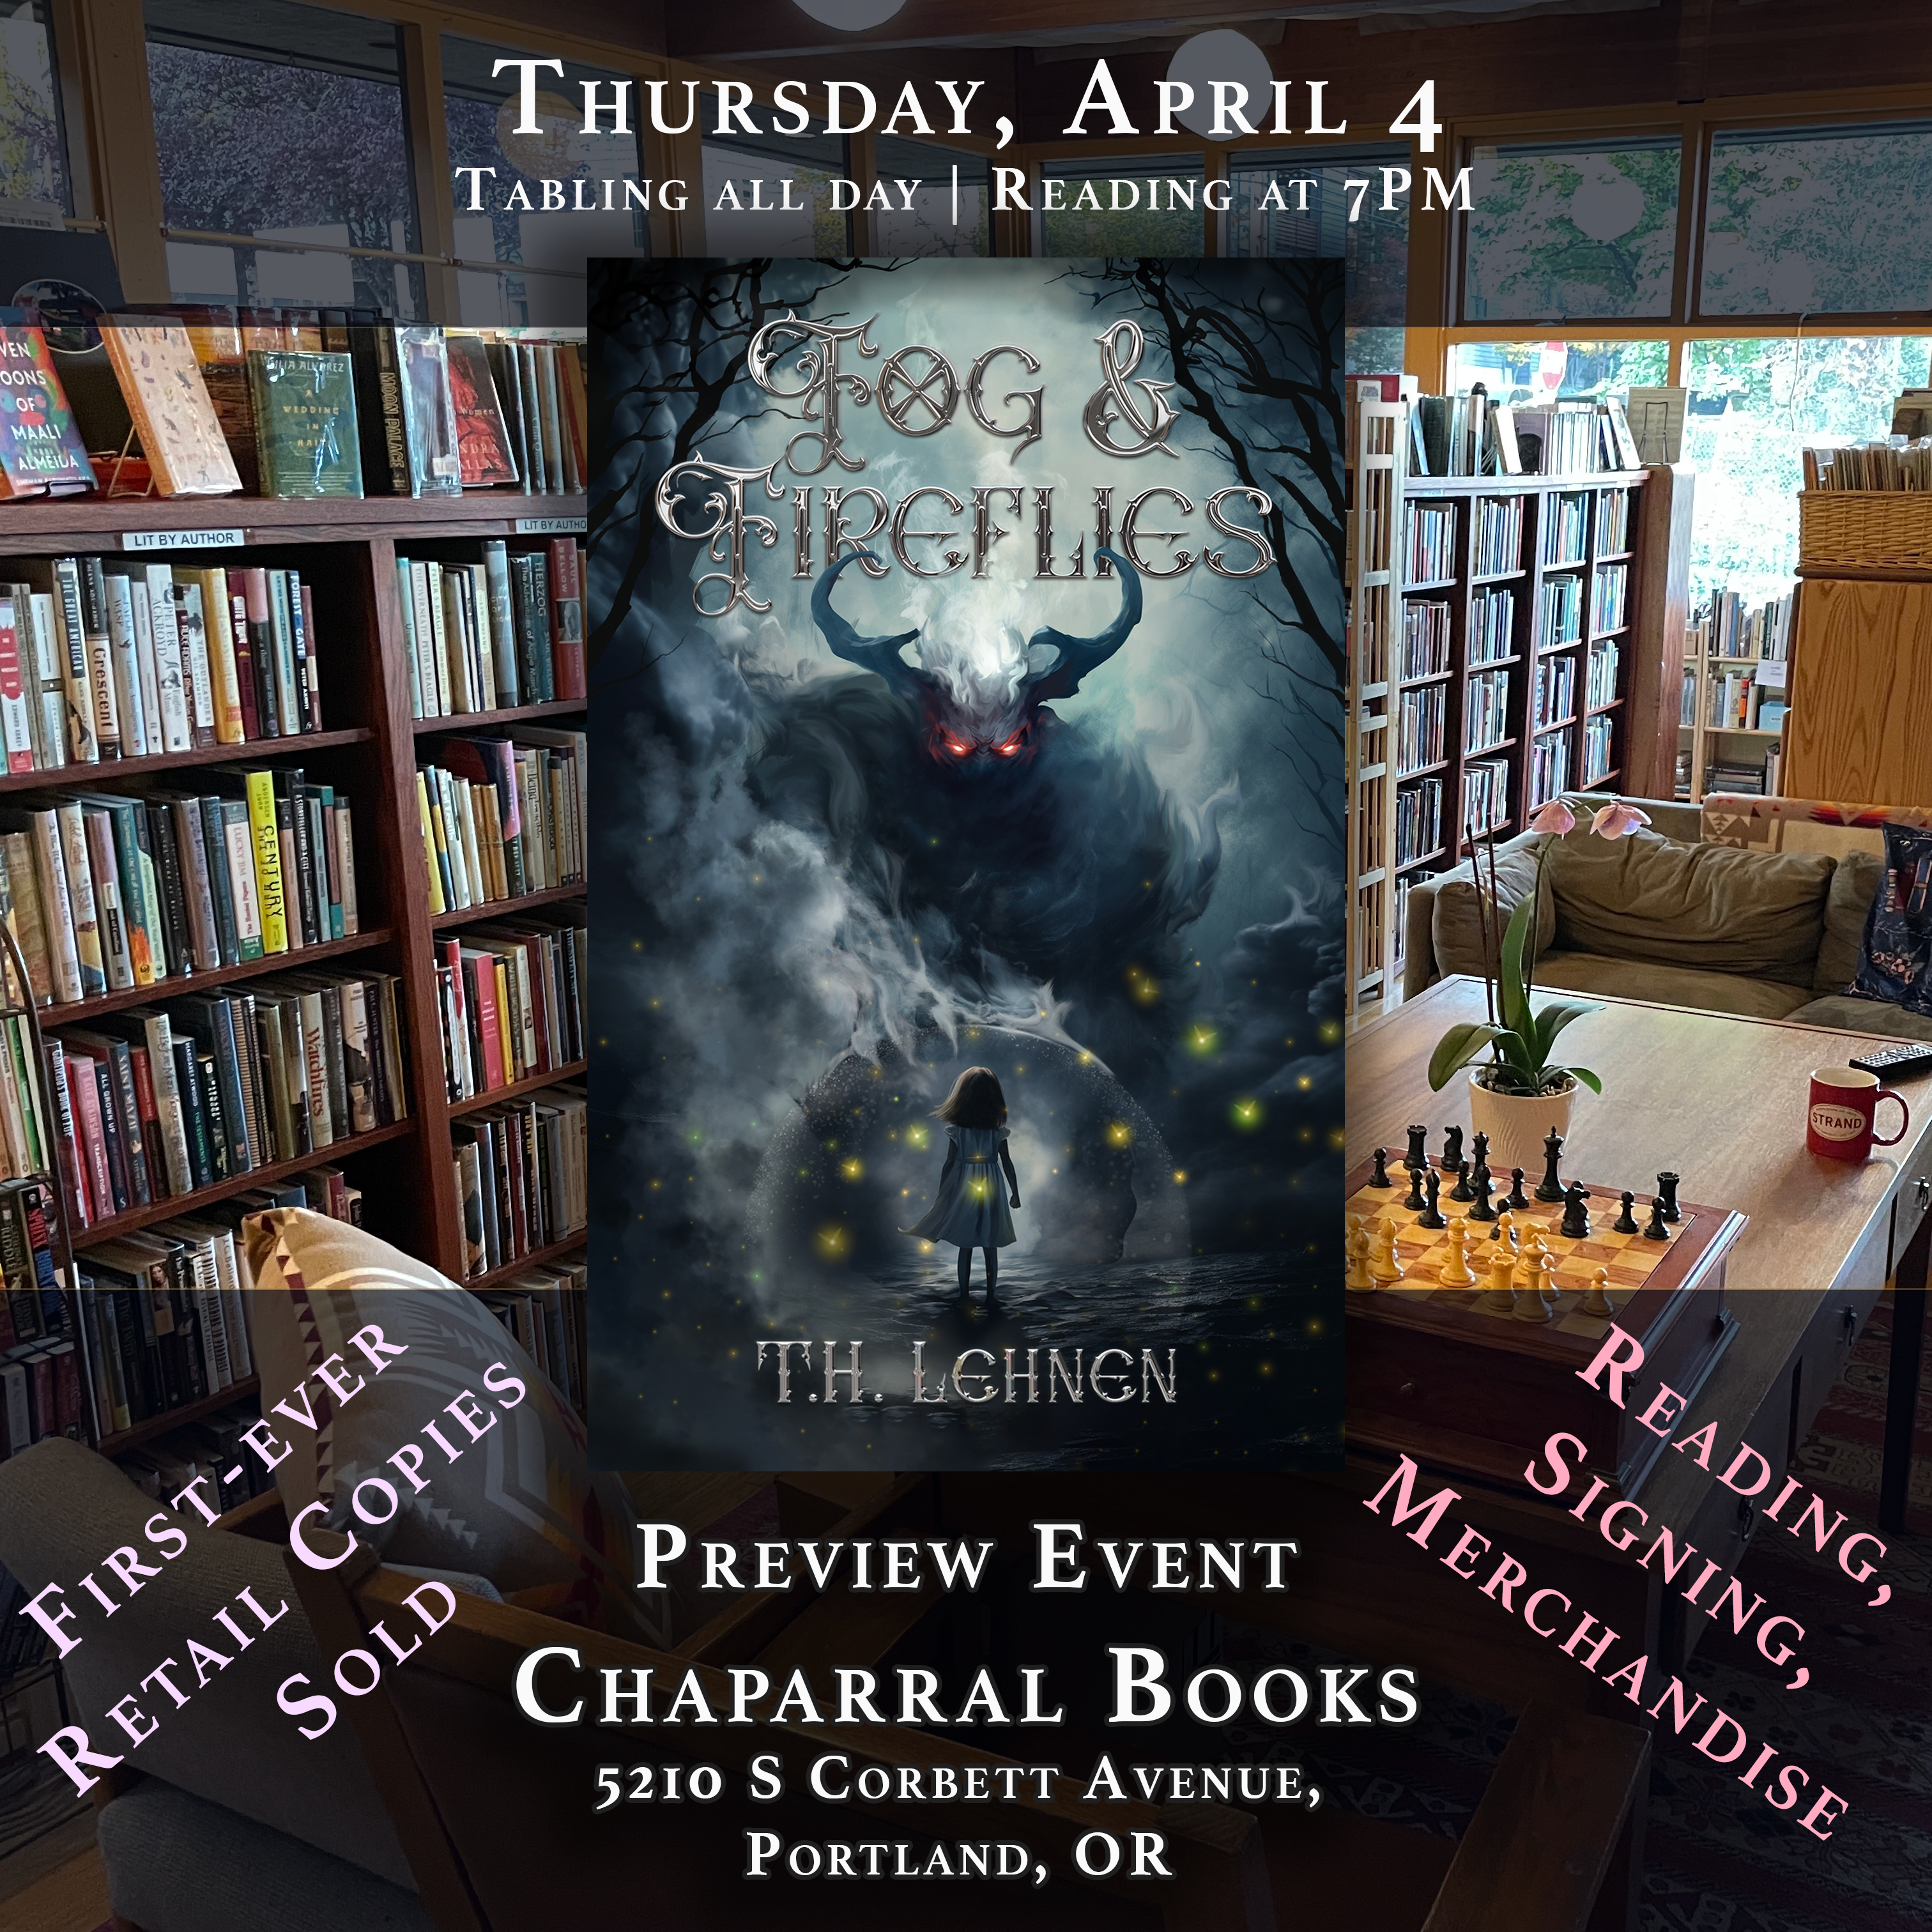 Preview Event for Fog & Fireflies at Chaparral Books on April 4